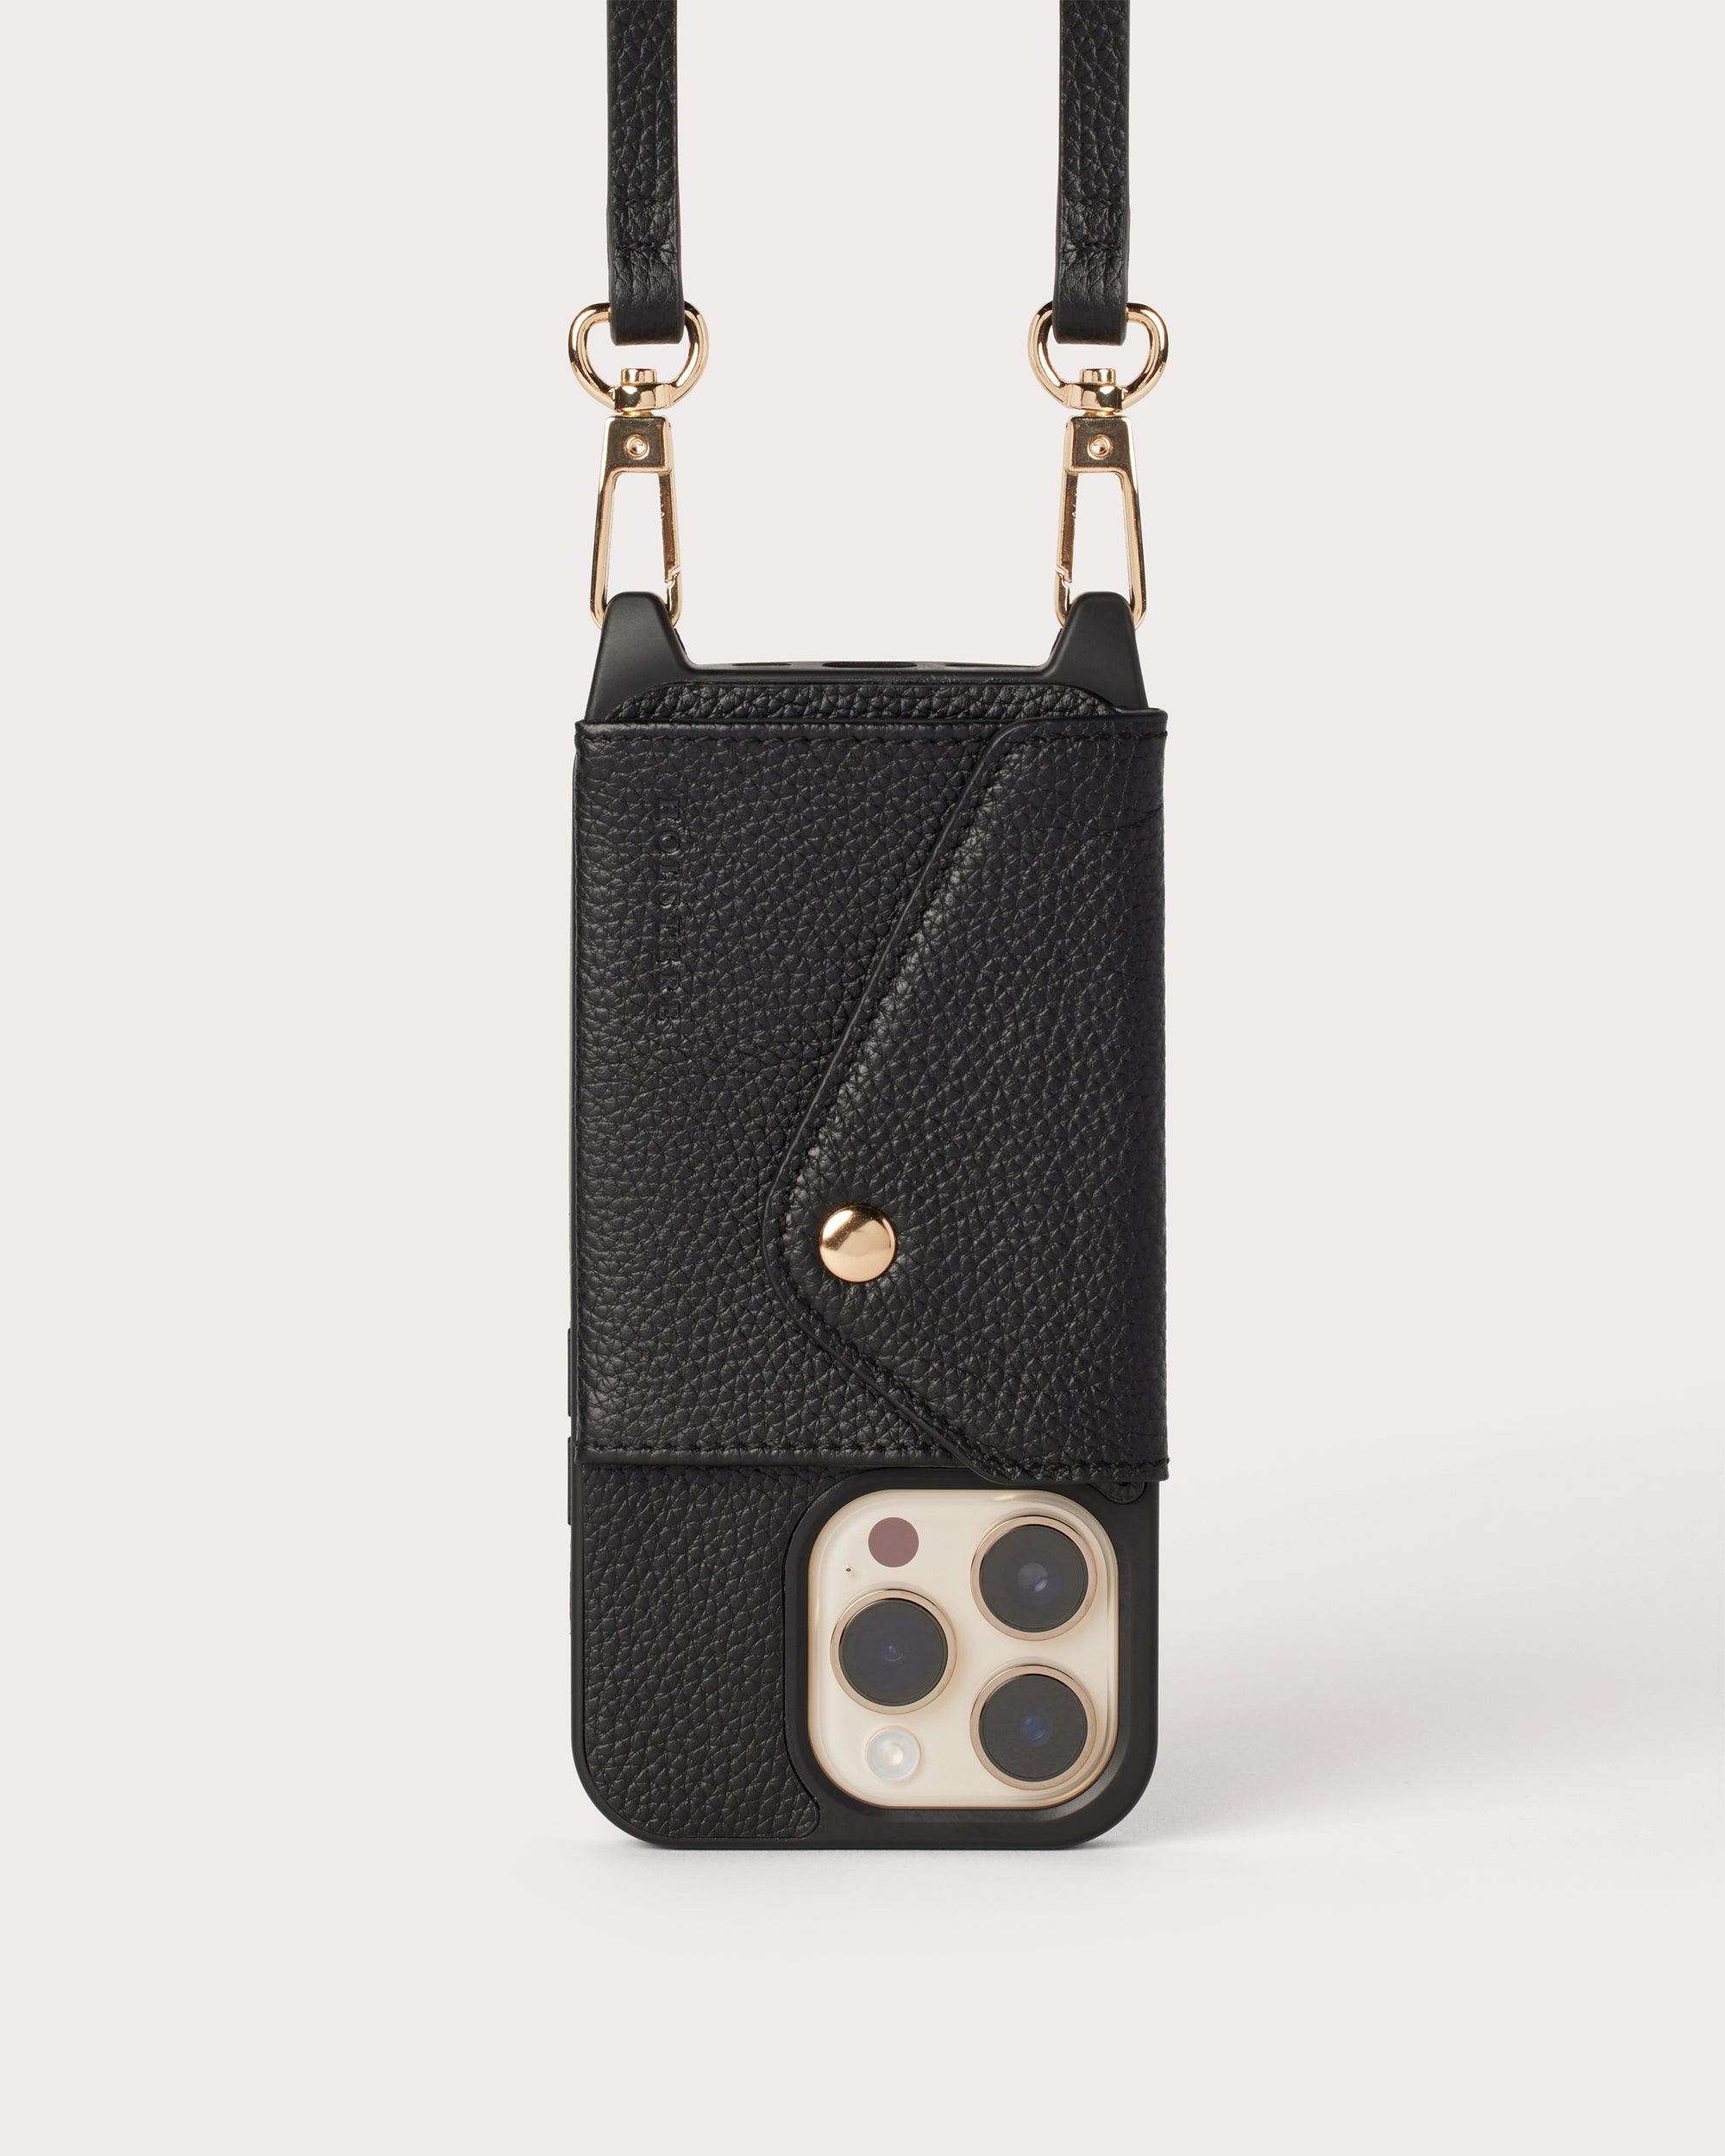 Holstere Genuine Pebbled Leather Studded Black Crossbody Strap with Gold-Toned Hardware